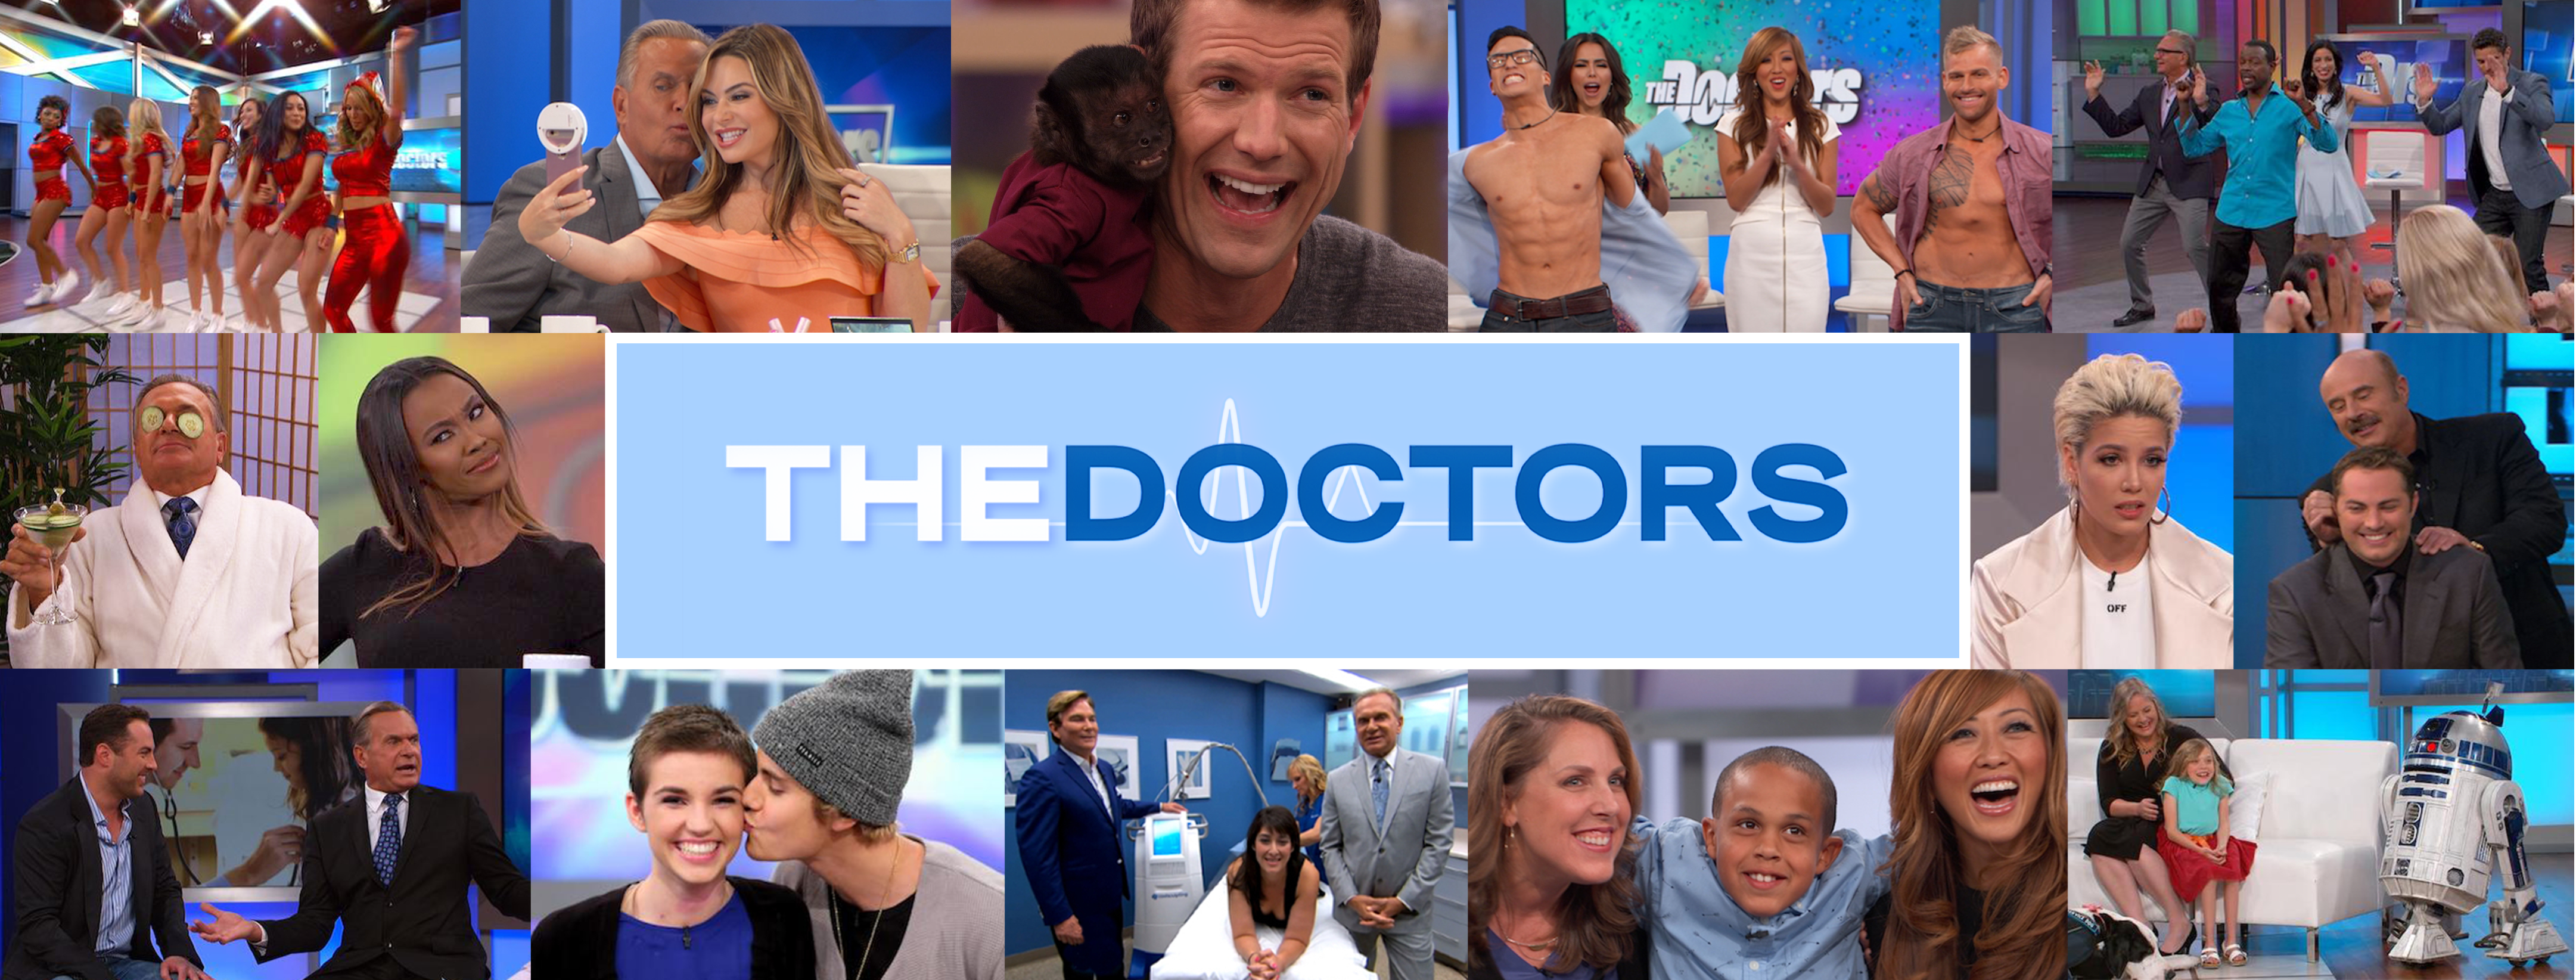 Doctor On Demand - JIA | The Doctors TV Show